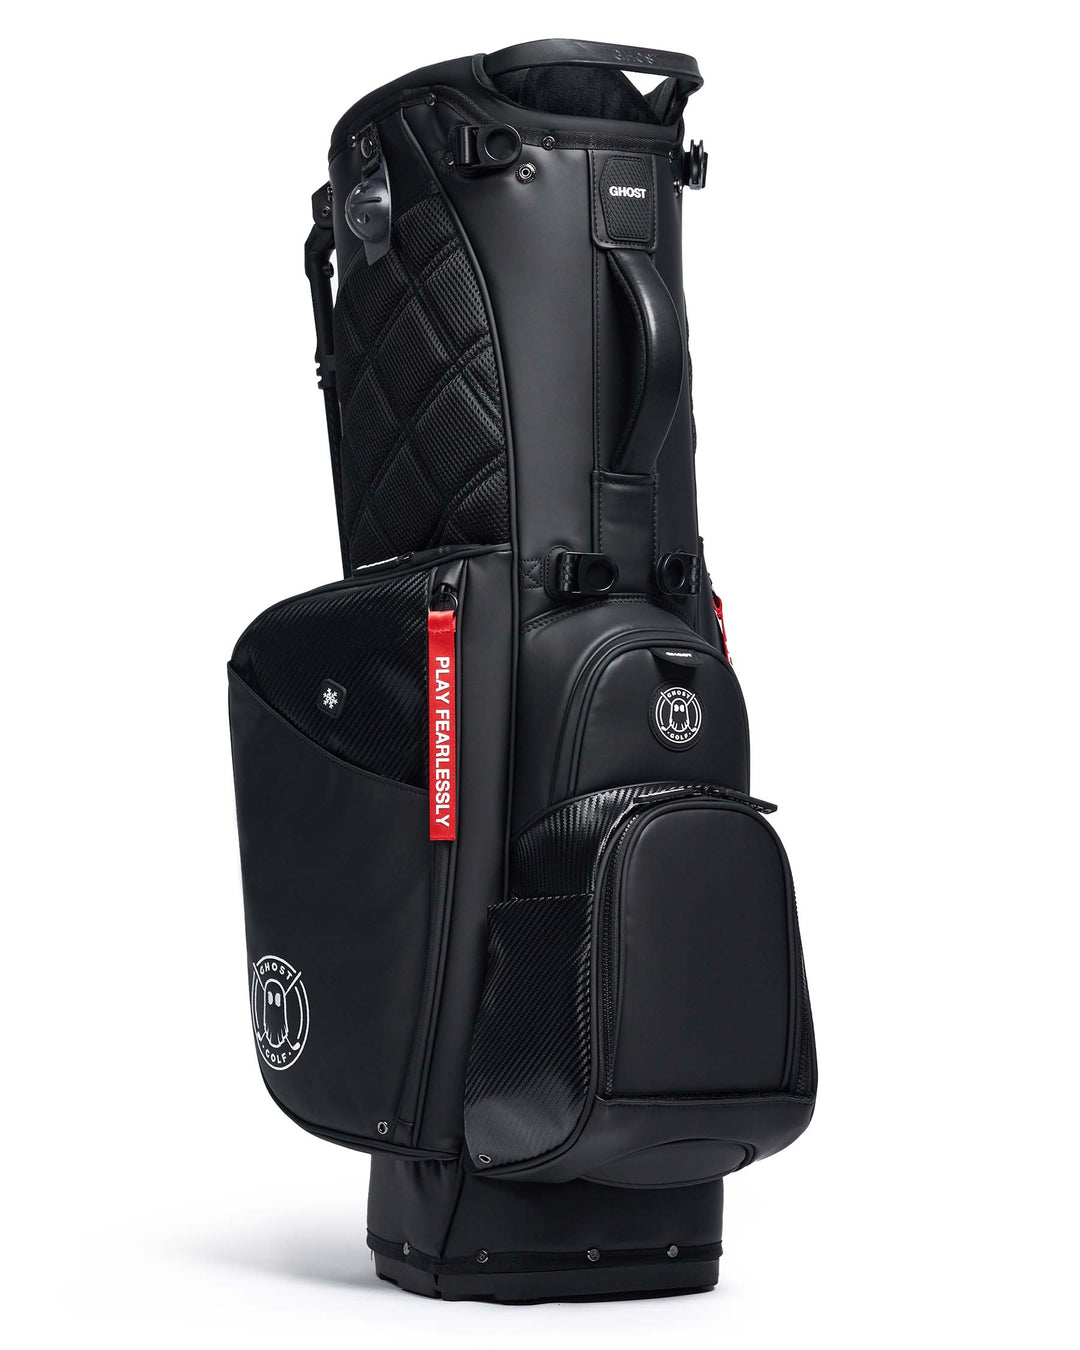 GhostGolf - The ultimate Ghost Golf bag additions that